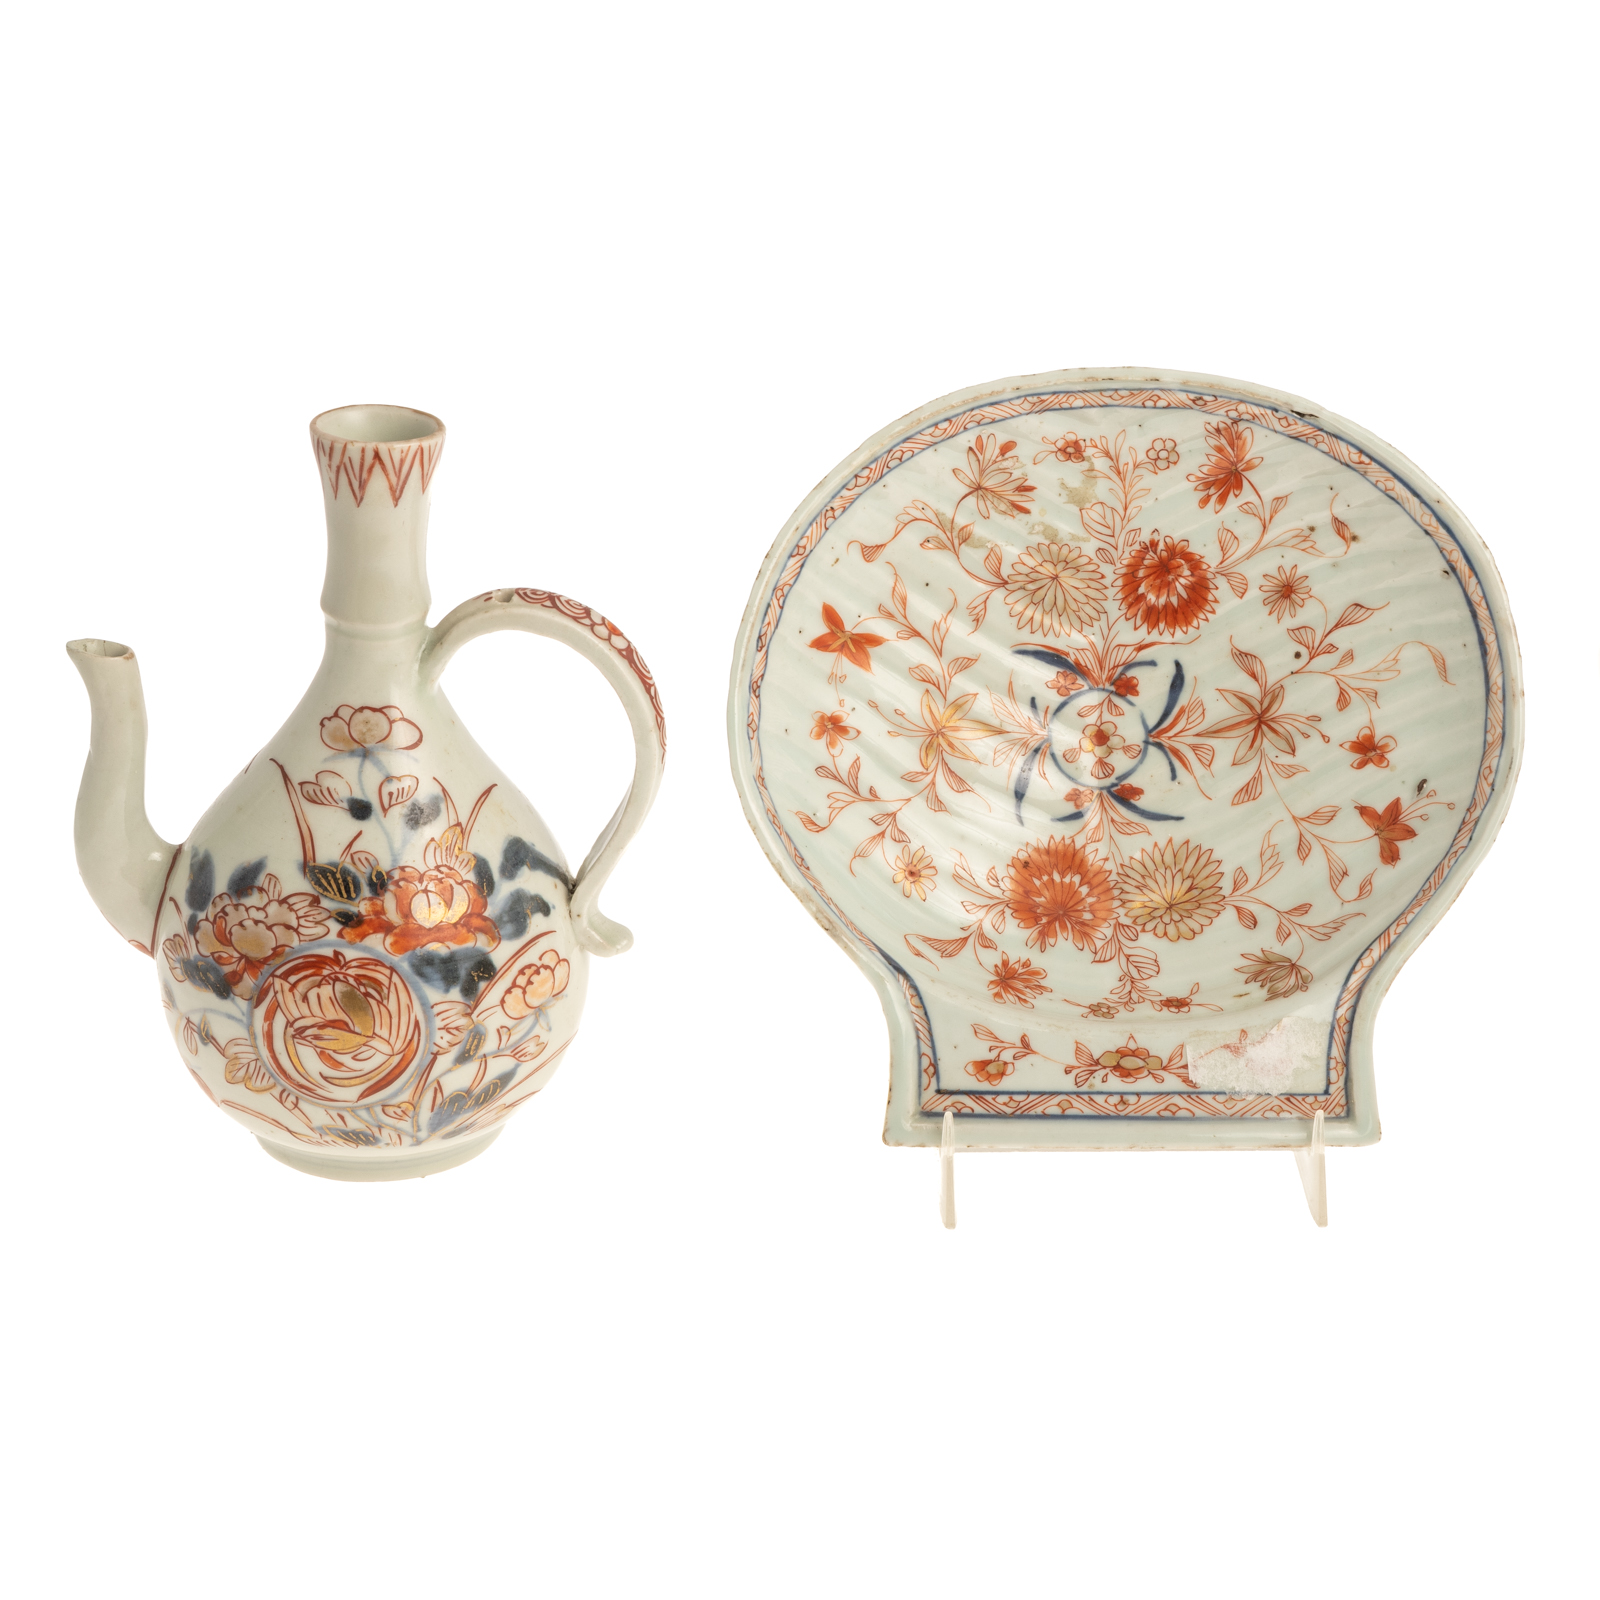 TWO CHINESE EXPORT IMARI ARTICLES 2e9a24